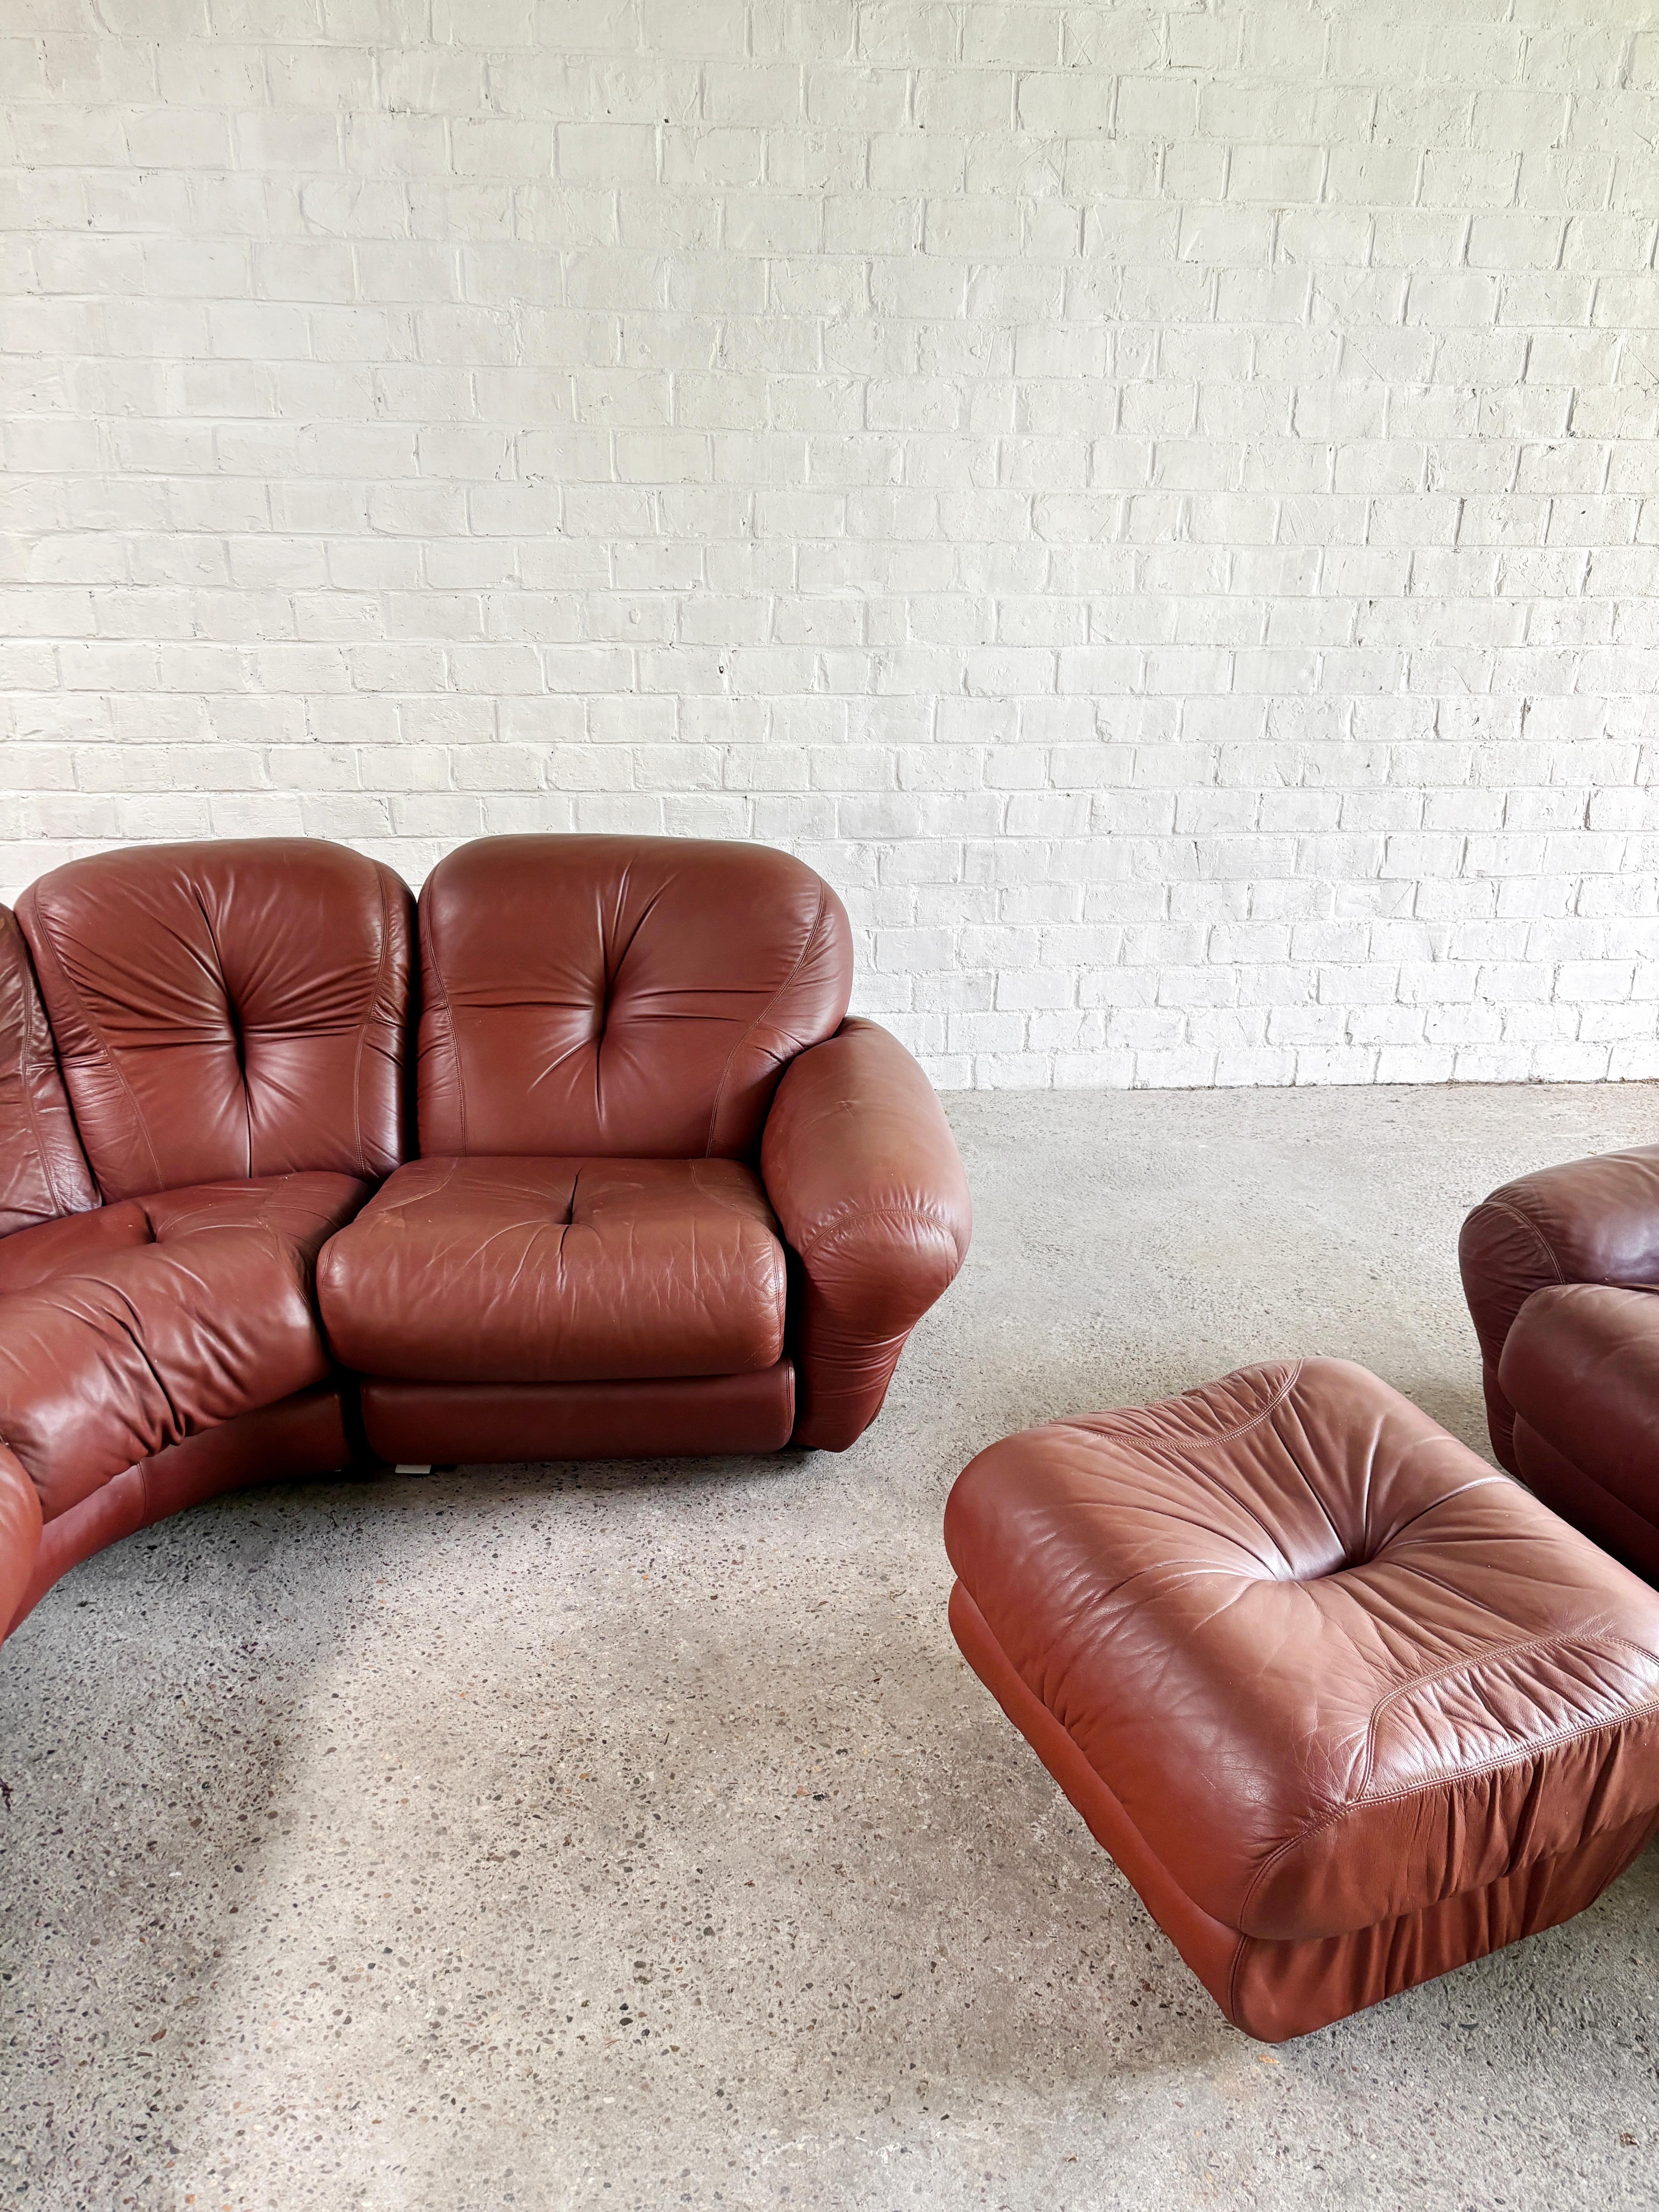 Late 20th Century Italian Modular Sofa Set In Cognac Leather Attributed To Mobil Girgi, 1970's For Sale